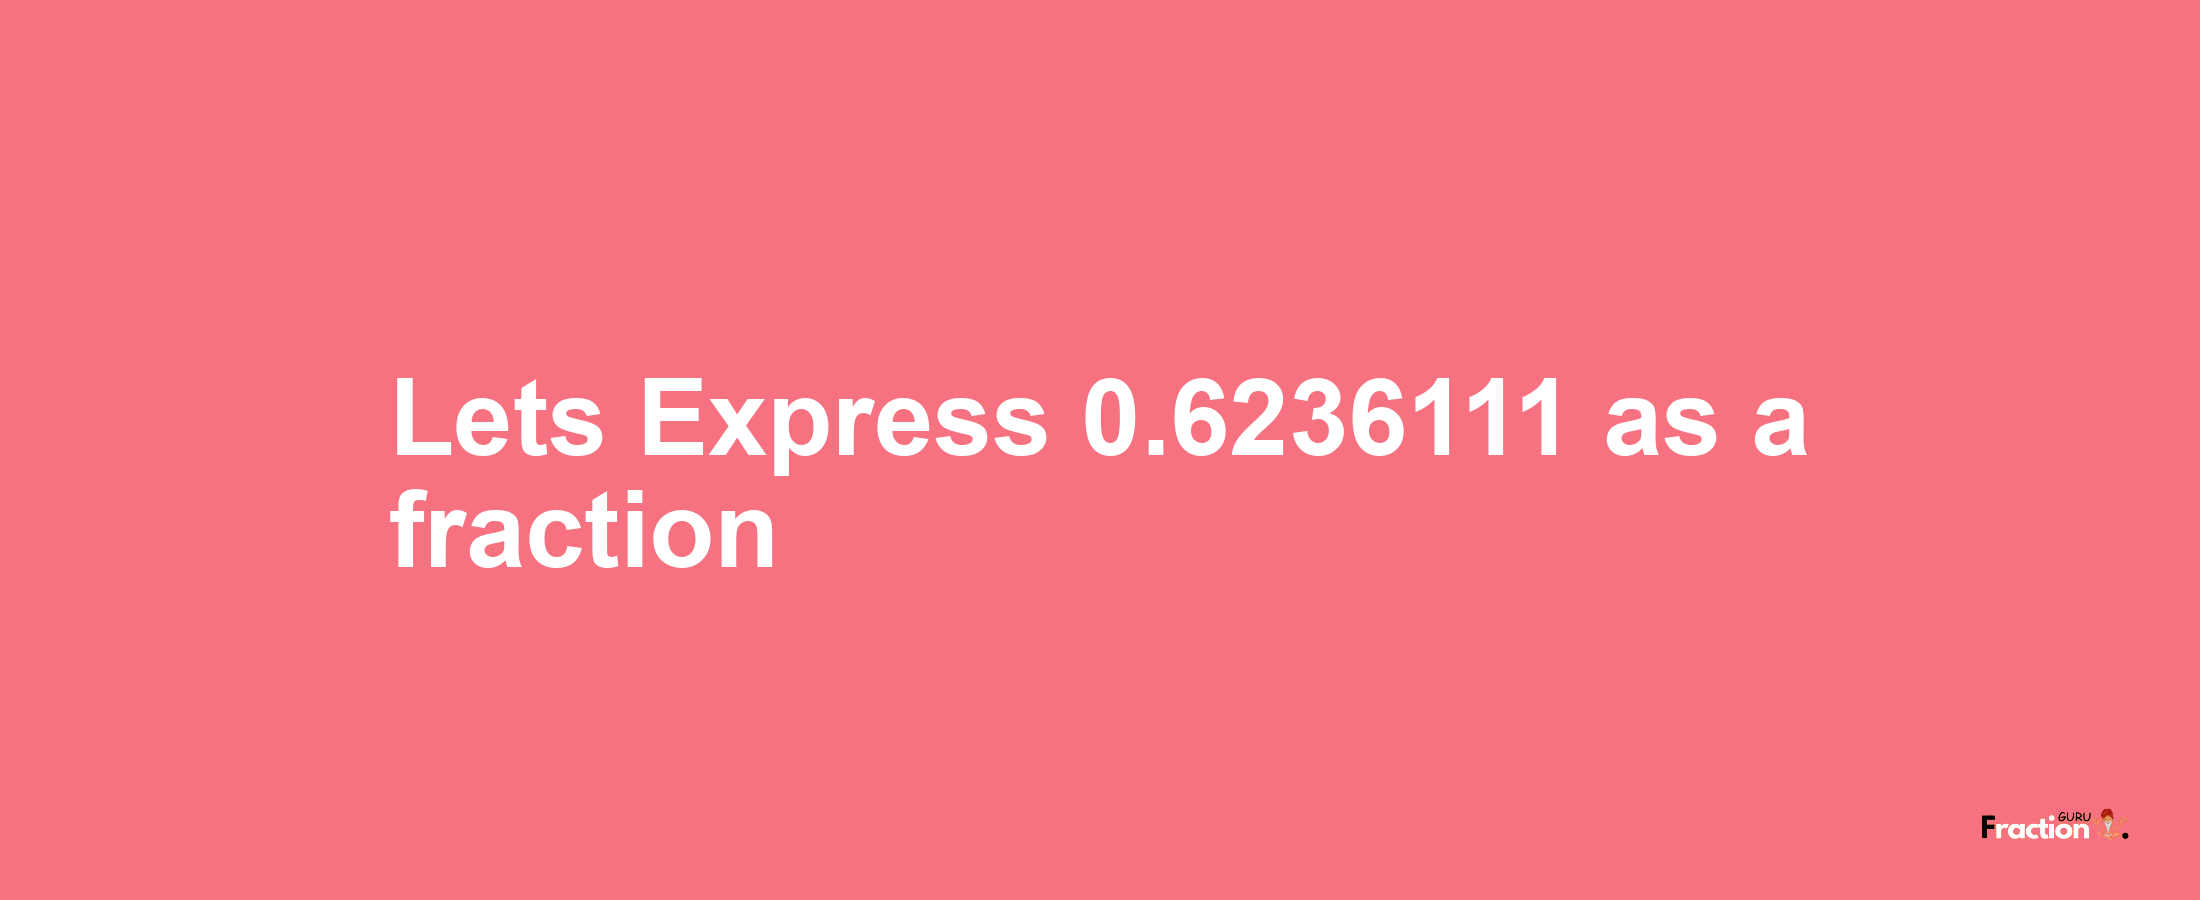 Lets Express 0.6236111 as afraction